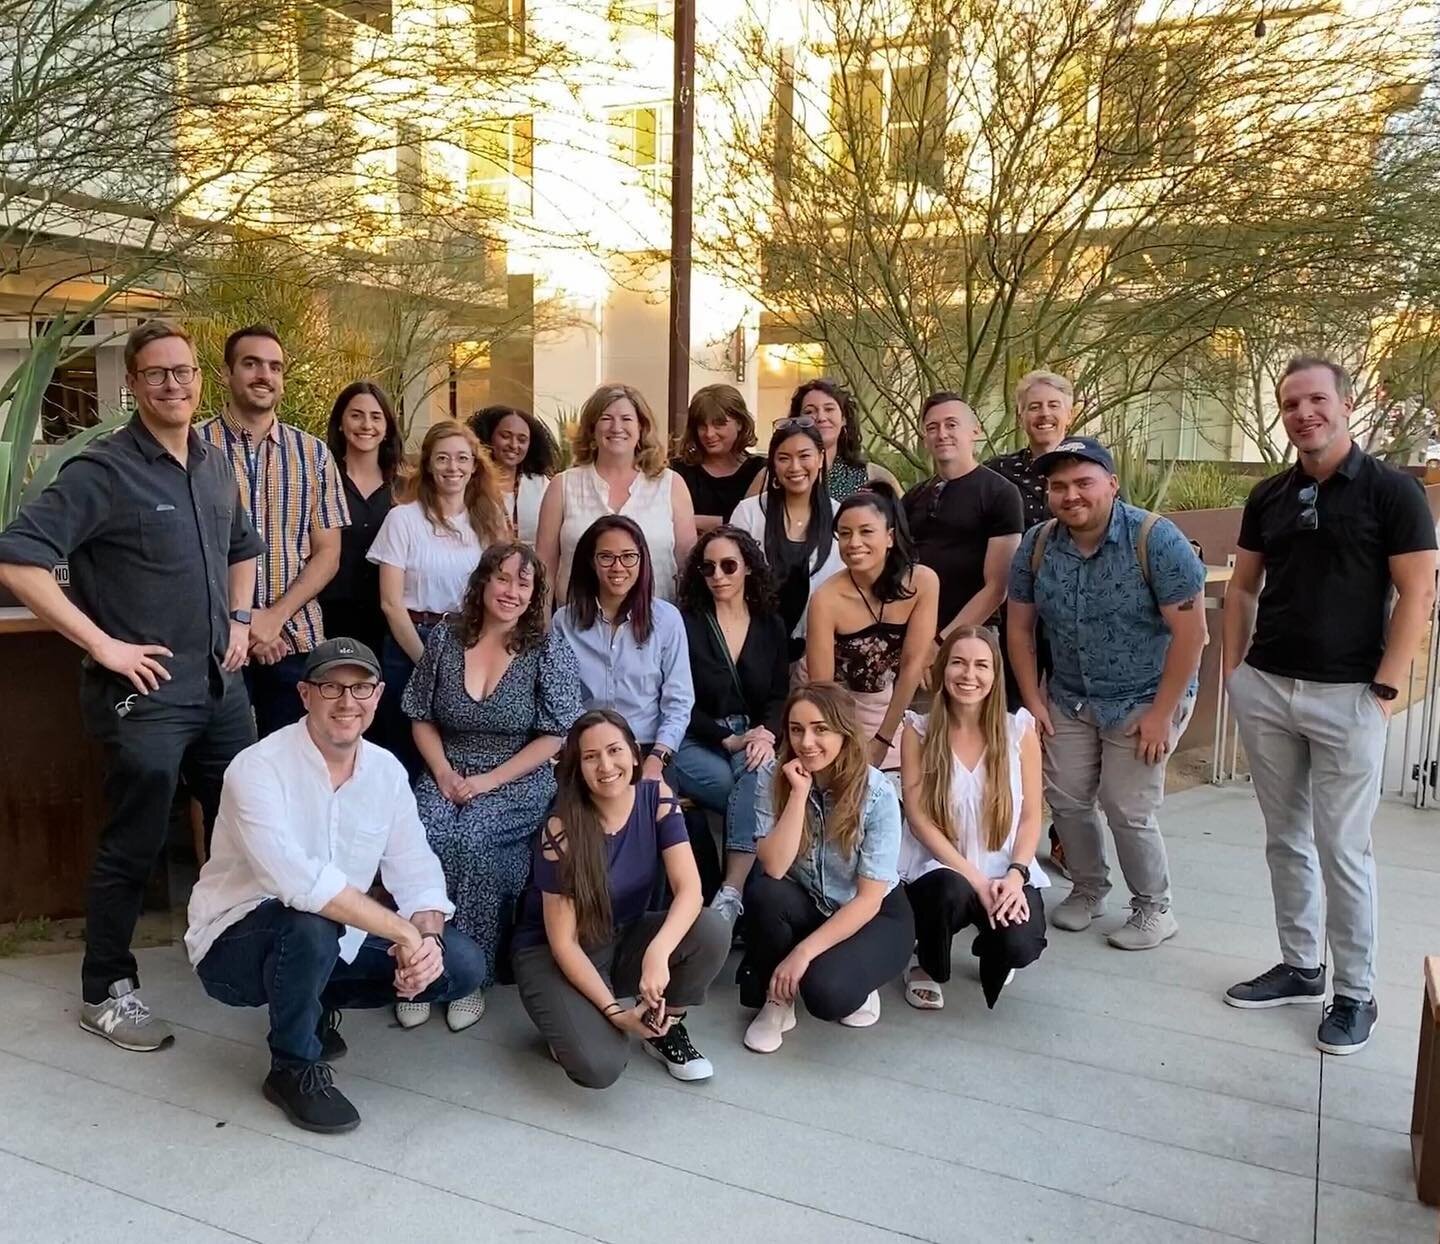 We love seeing our San Francisco &amp; LA newsrooms get together outside of the office! 

#insider #businessinsider #employeeexperience #newsroom #westcoast #friendsoutsideofwork #happyhour #inperson #workplaceculture #companyculture #sanfrancisco #l